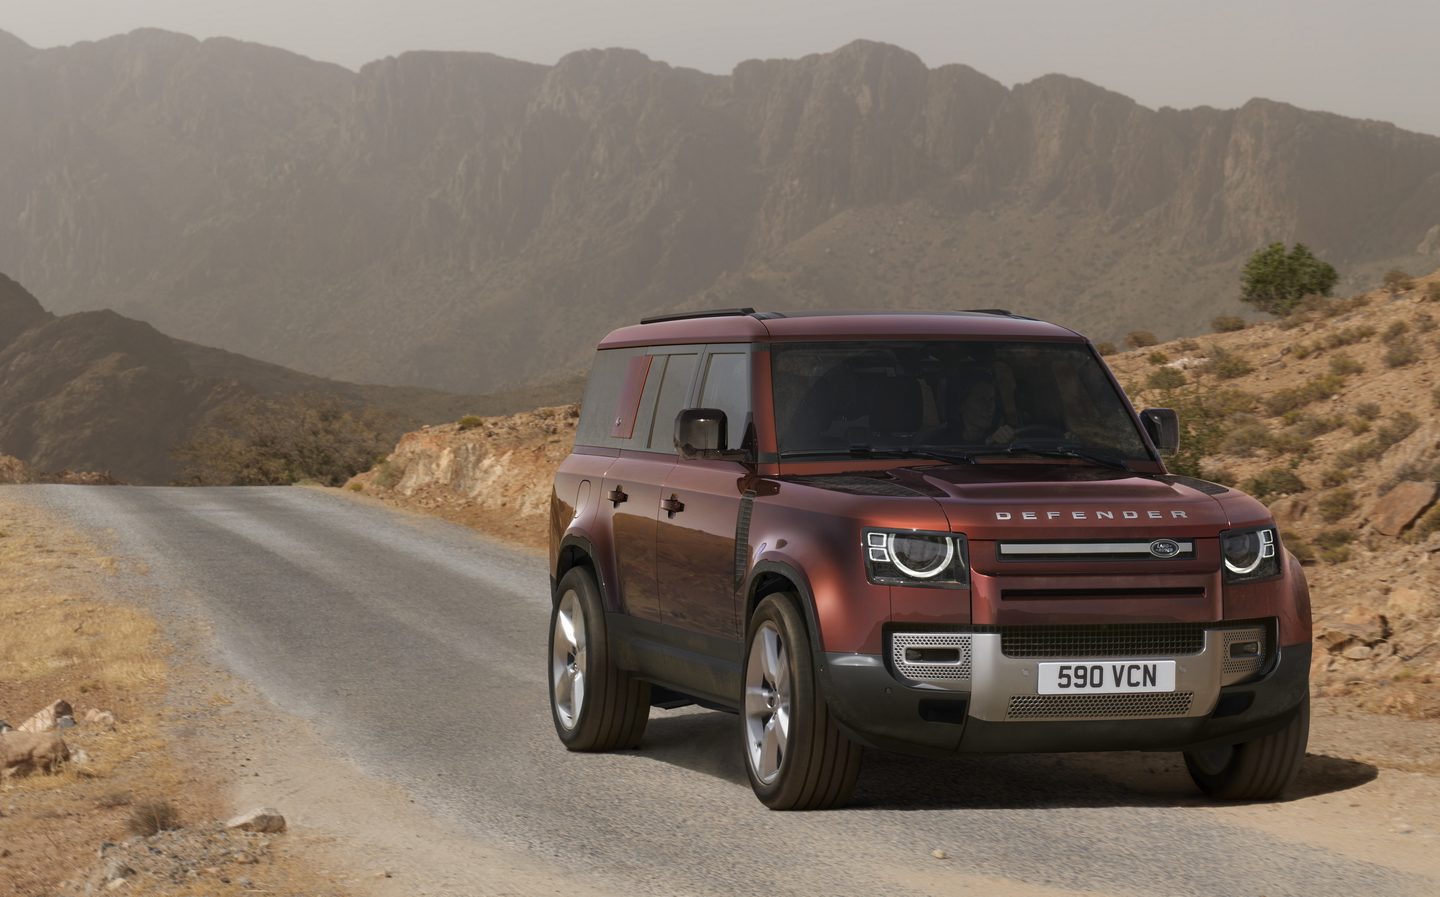 defender, land rover, land rover defender 130 review 2023: it's the size that counts with lengthened landy